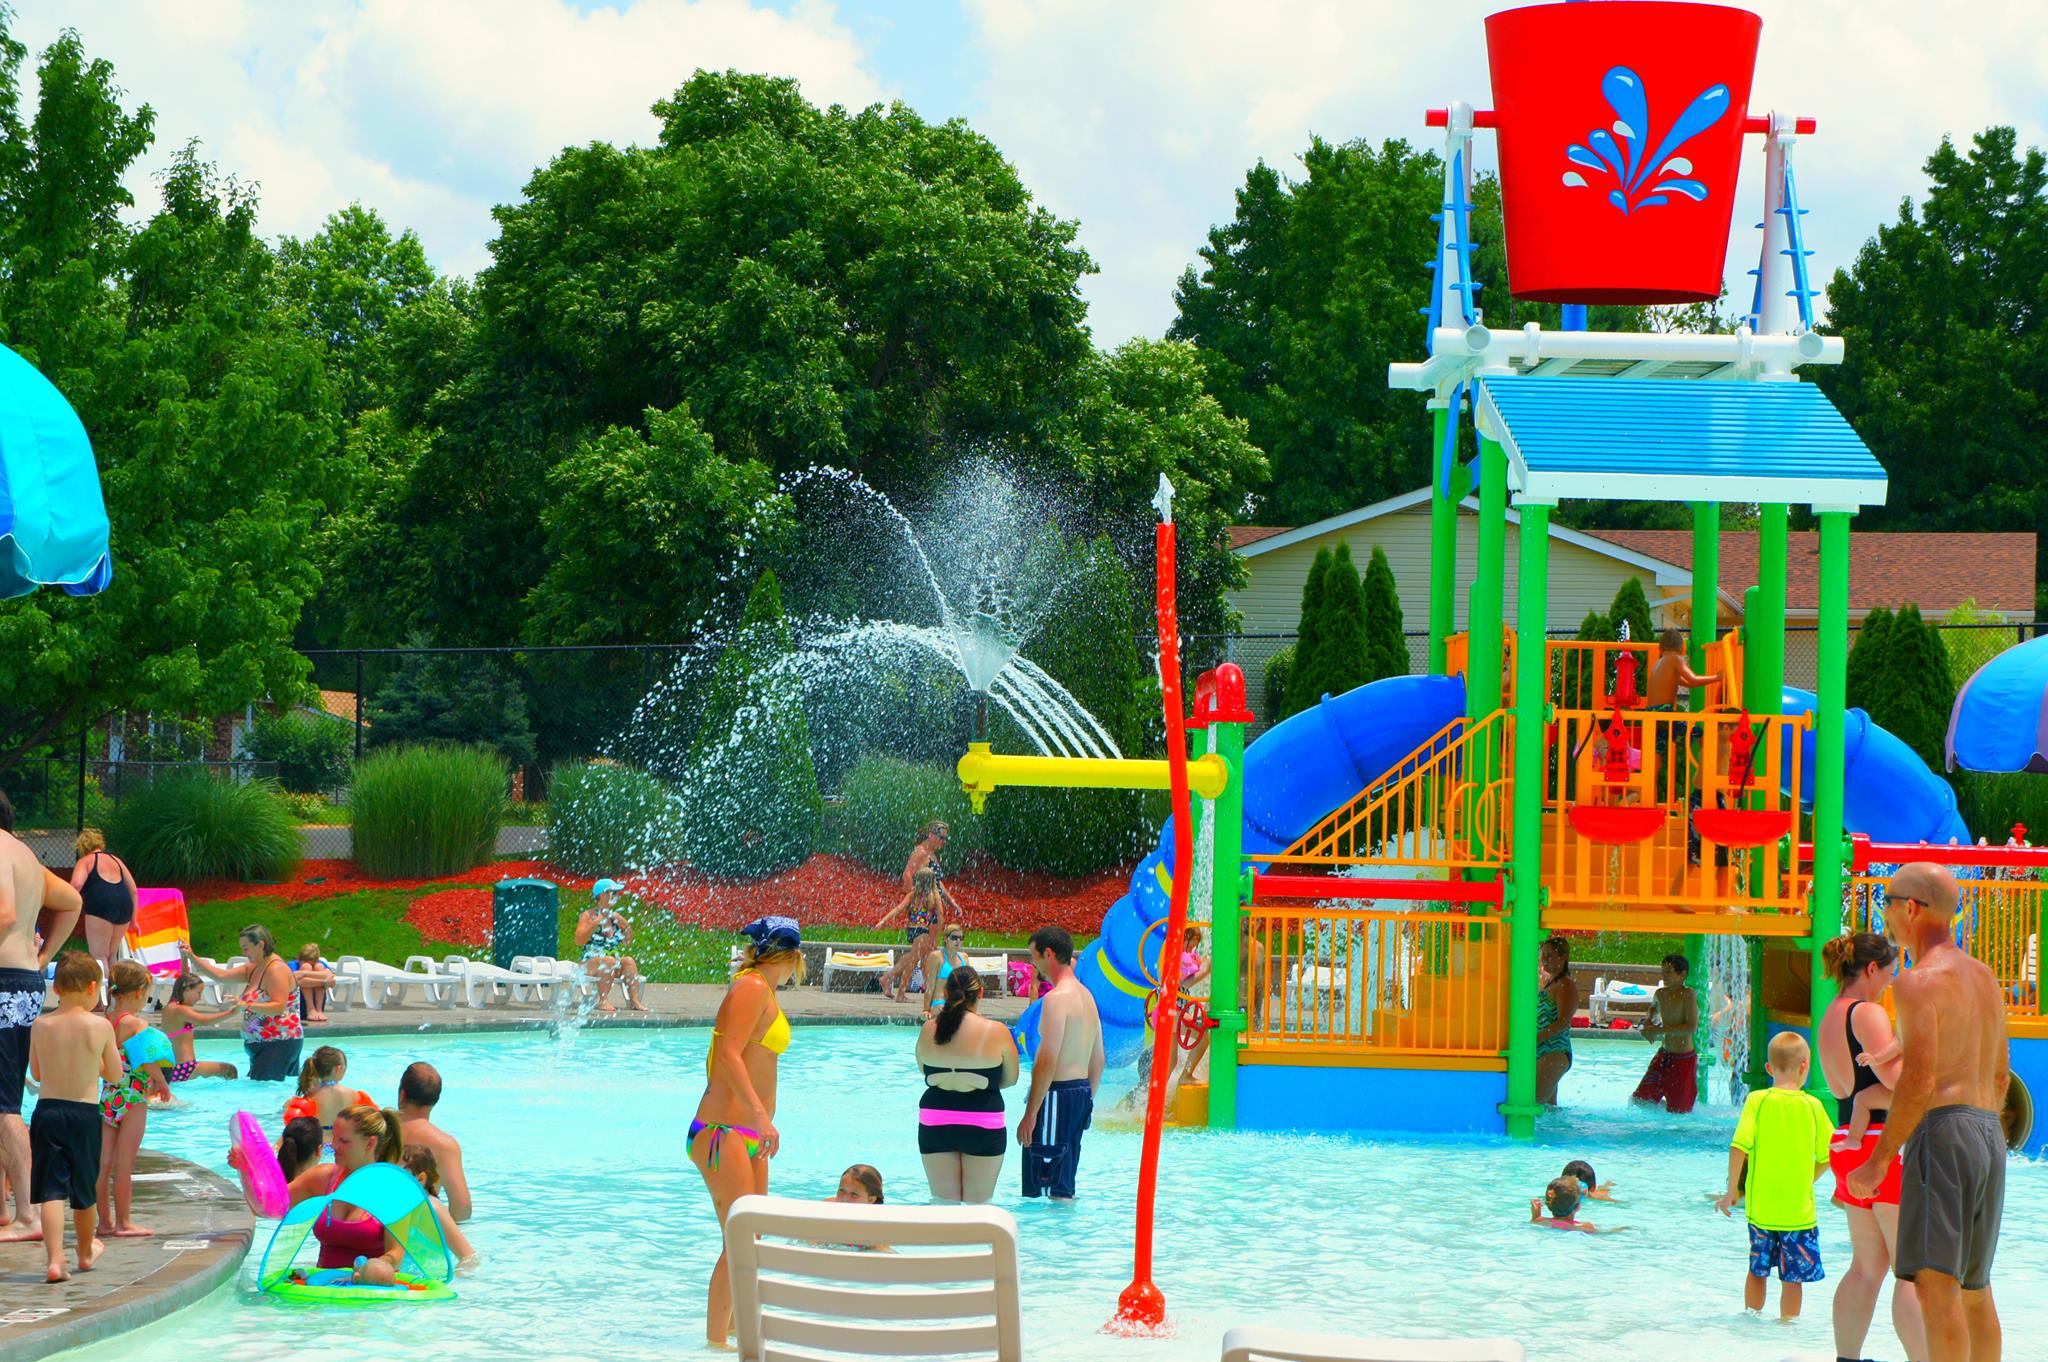 Season Passes Available For Water Park